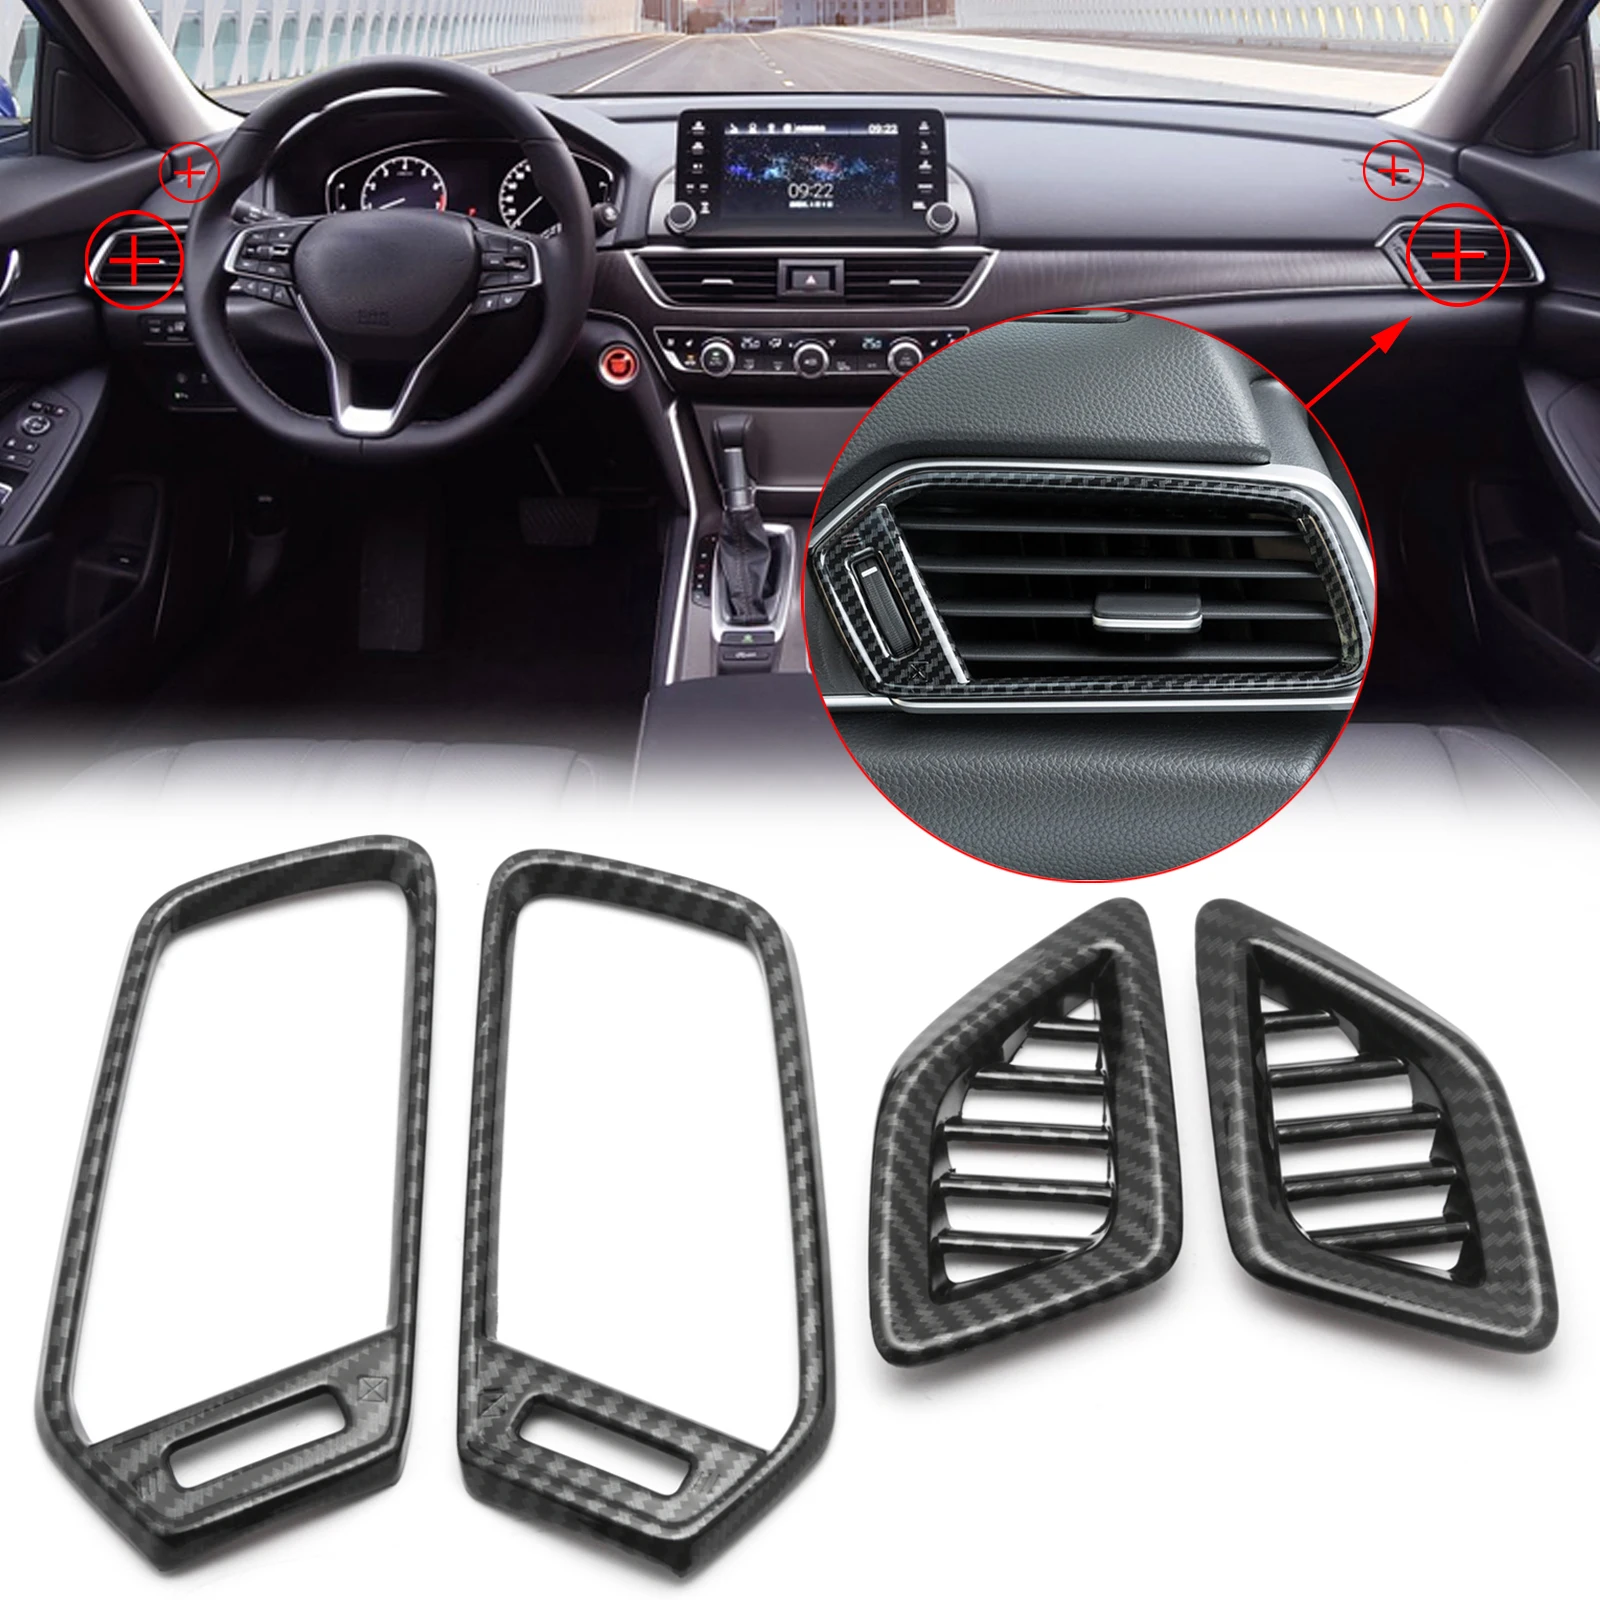 Carbon Fiber Style Interior Dashboard Air Vent AC Outlet Cover Molding Trim Decals For Honda Accord 10th Gen 2018 2019 2020 2021